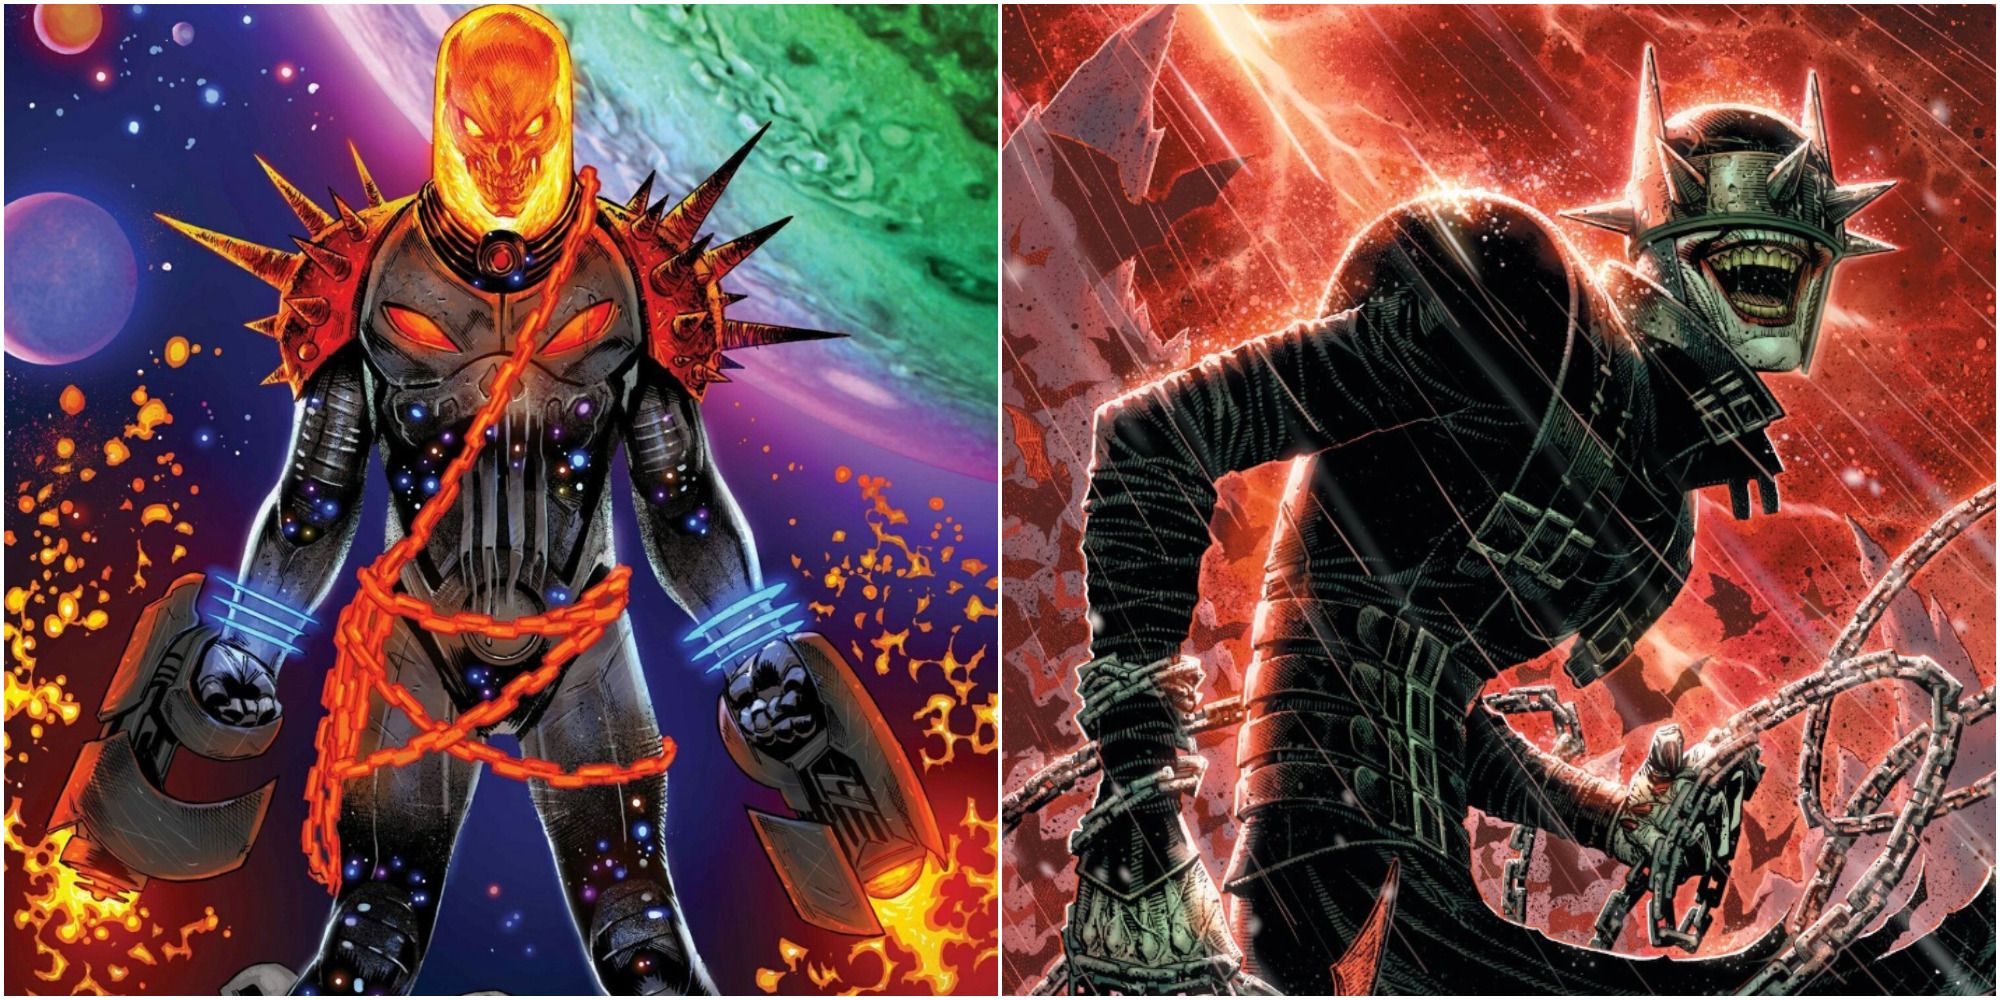 Who is the Green Ghost Rider?